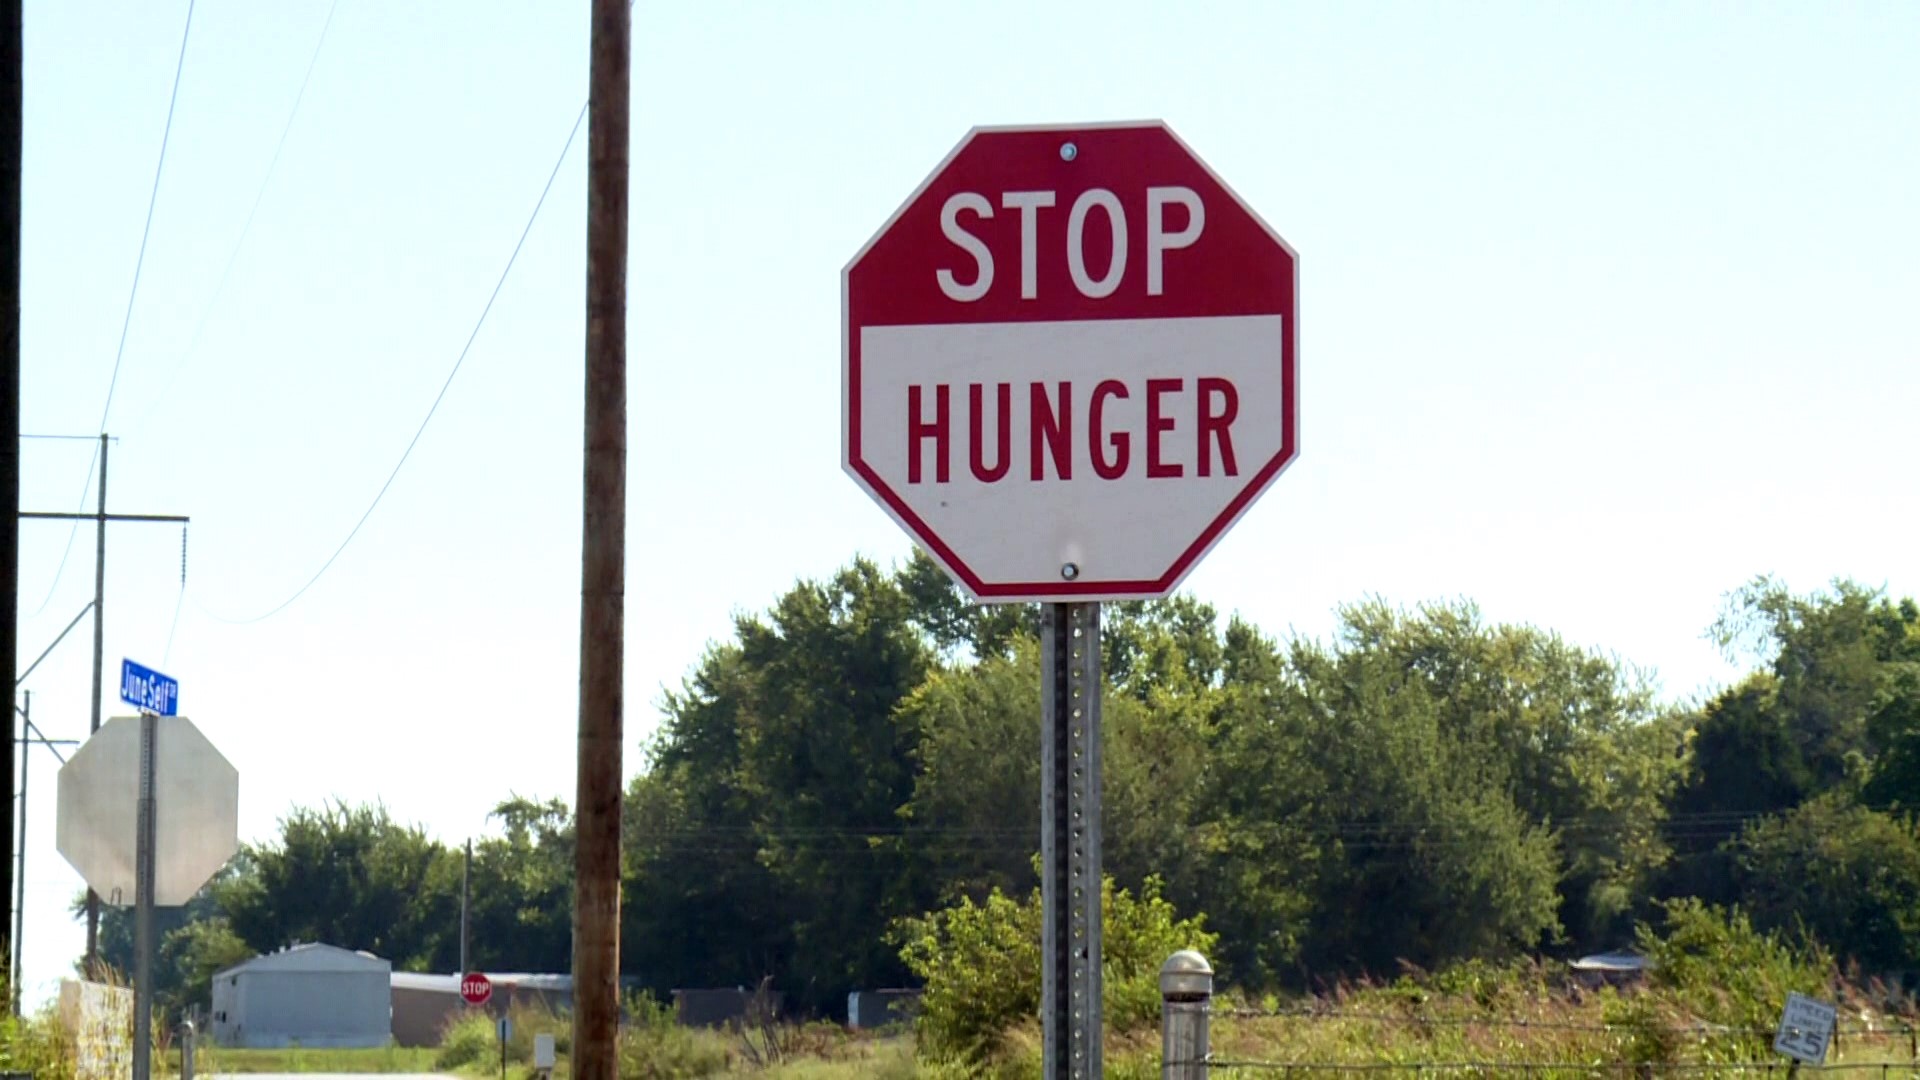 September is Hunger Action Month and the main goal is to end hunger one helping at a time.